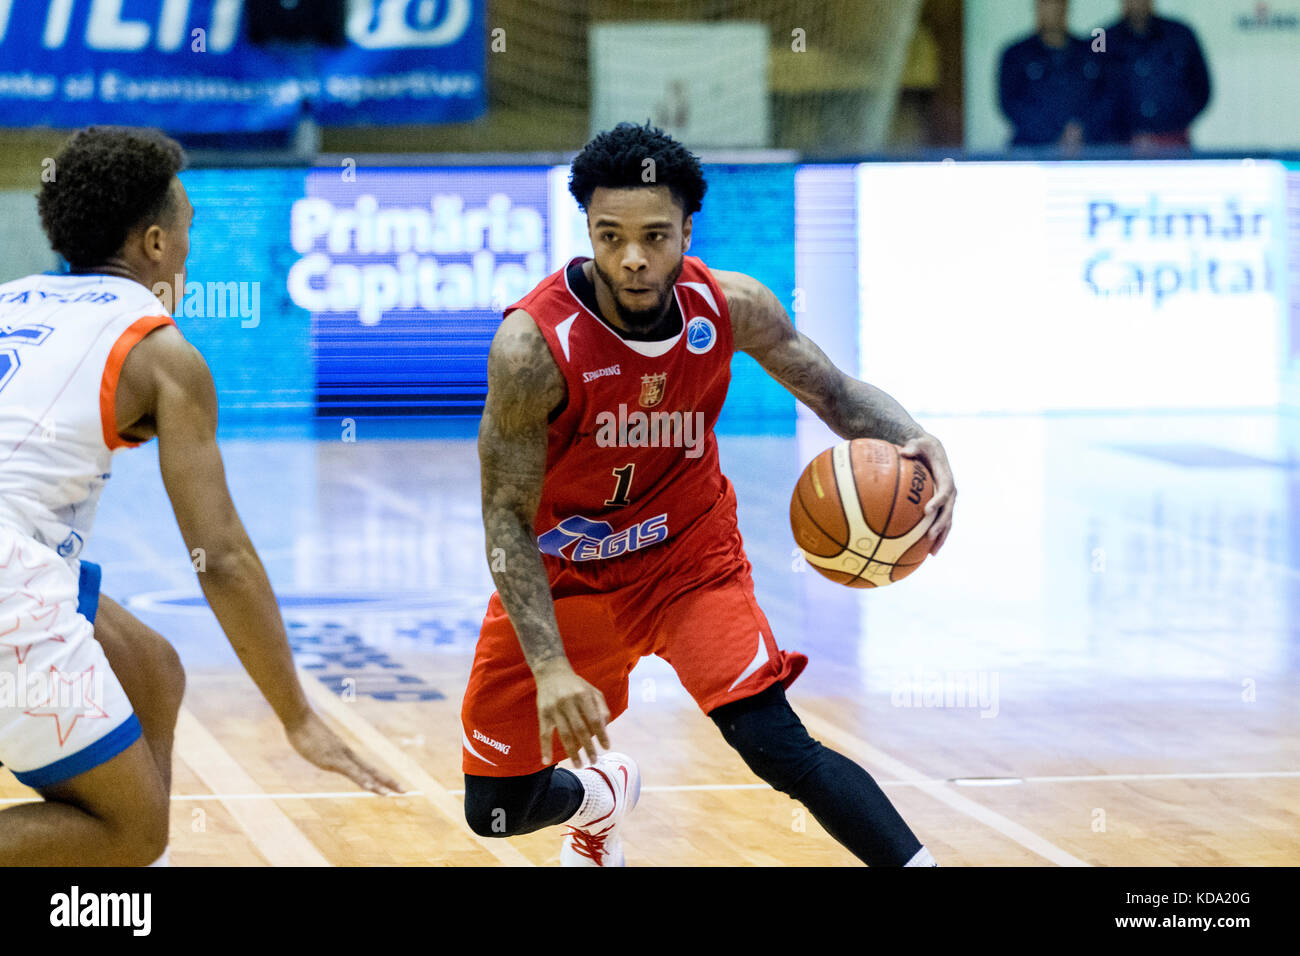 October 11, 2017: Marquis Wright #1 (Egis Kormend) during the FIBA Europe  Cup 2017-2018, game